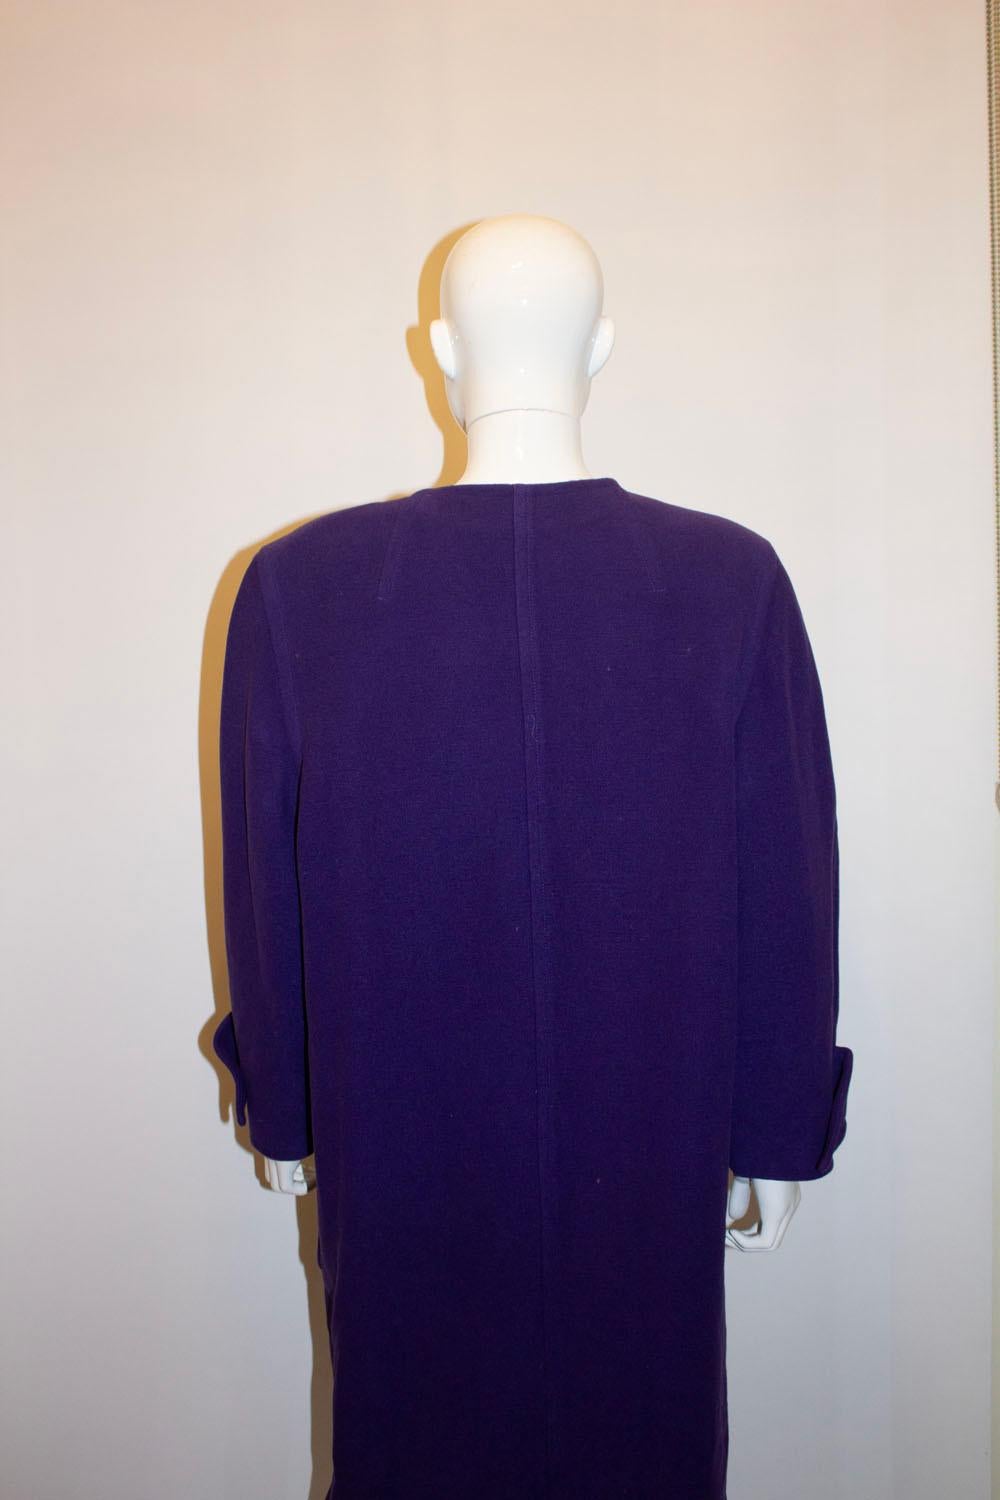 A statement vintage purple coat by Courreges In Good Condition For Sale In London, GB